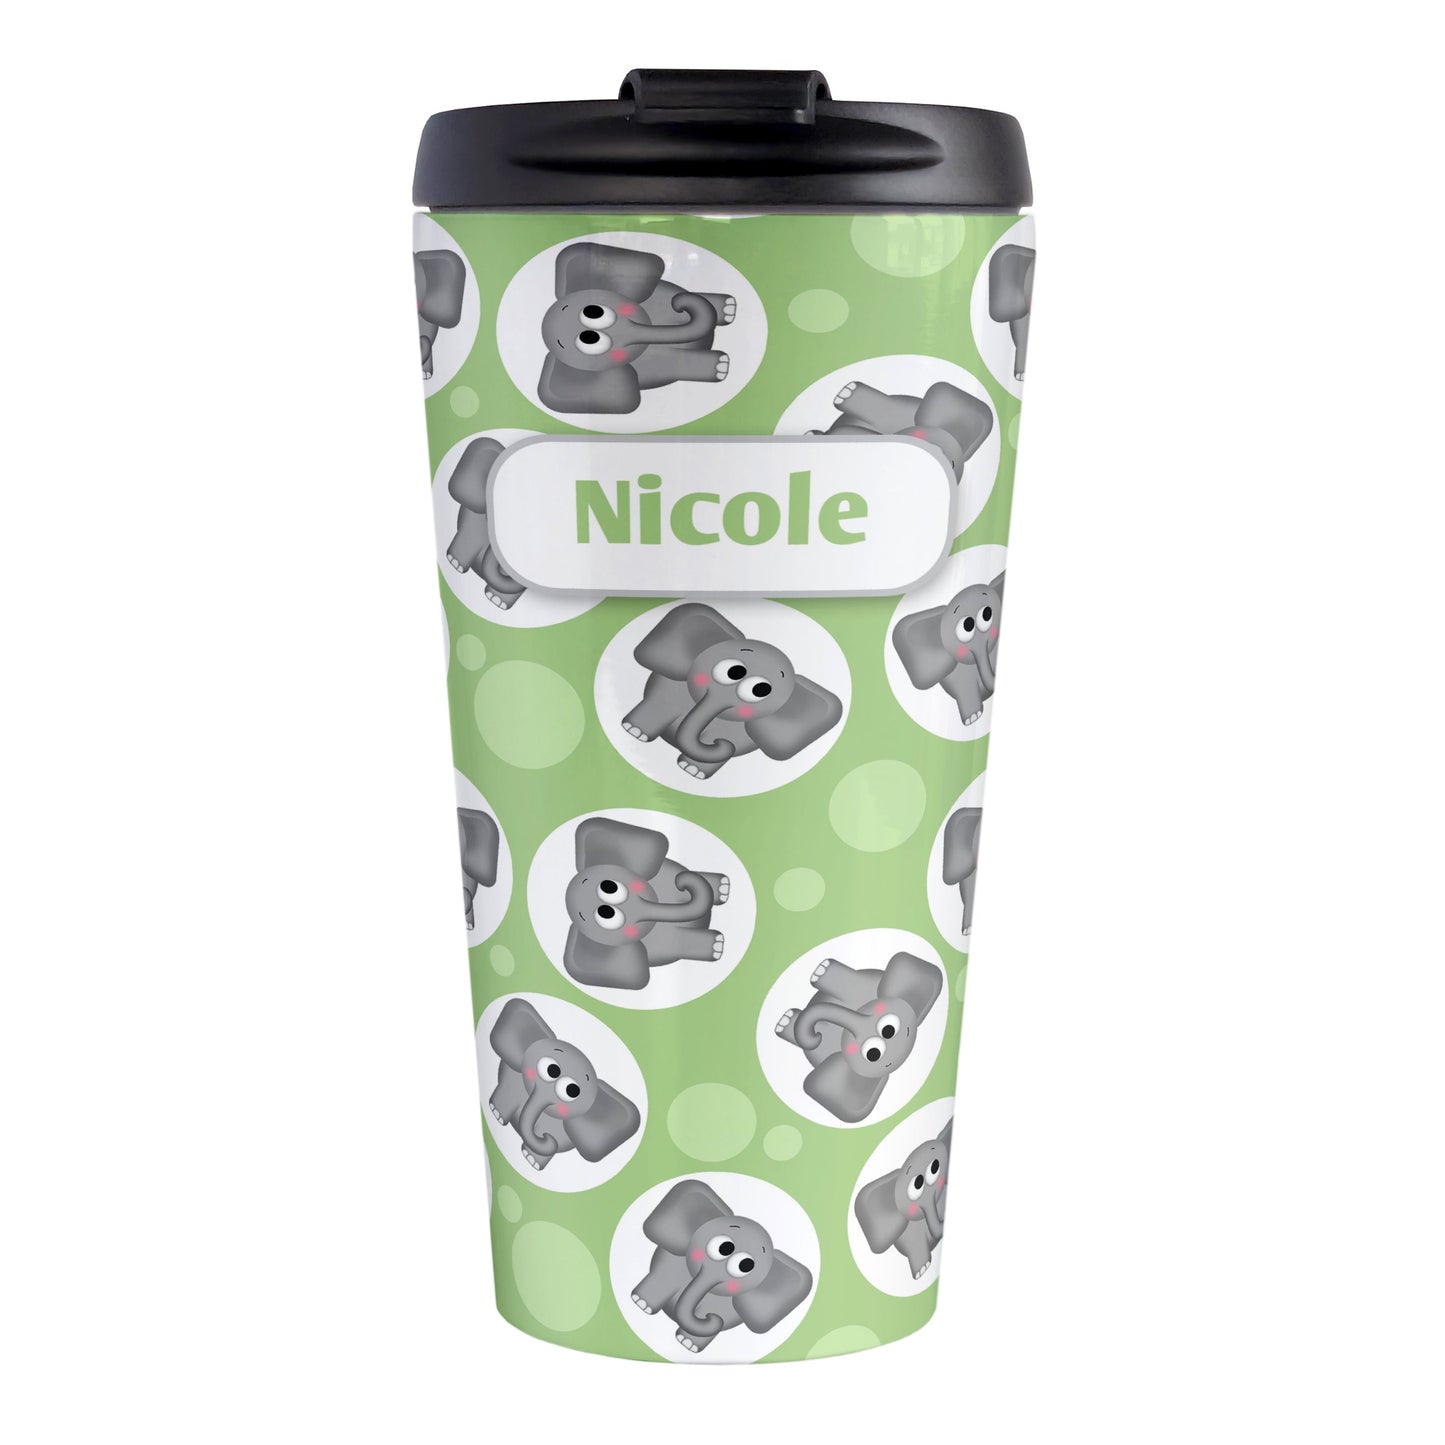 Personalized Cute Green Elephant Pattern Travel Mug (15oz, stainless steel insulated) at Amy's Coffee Mugs